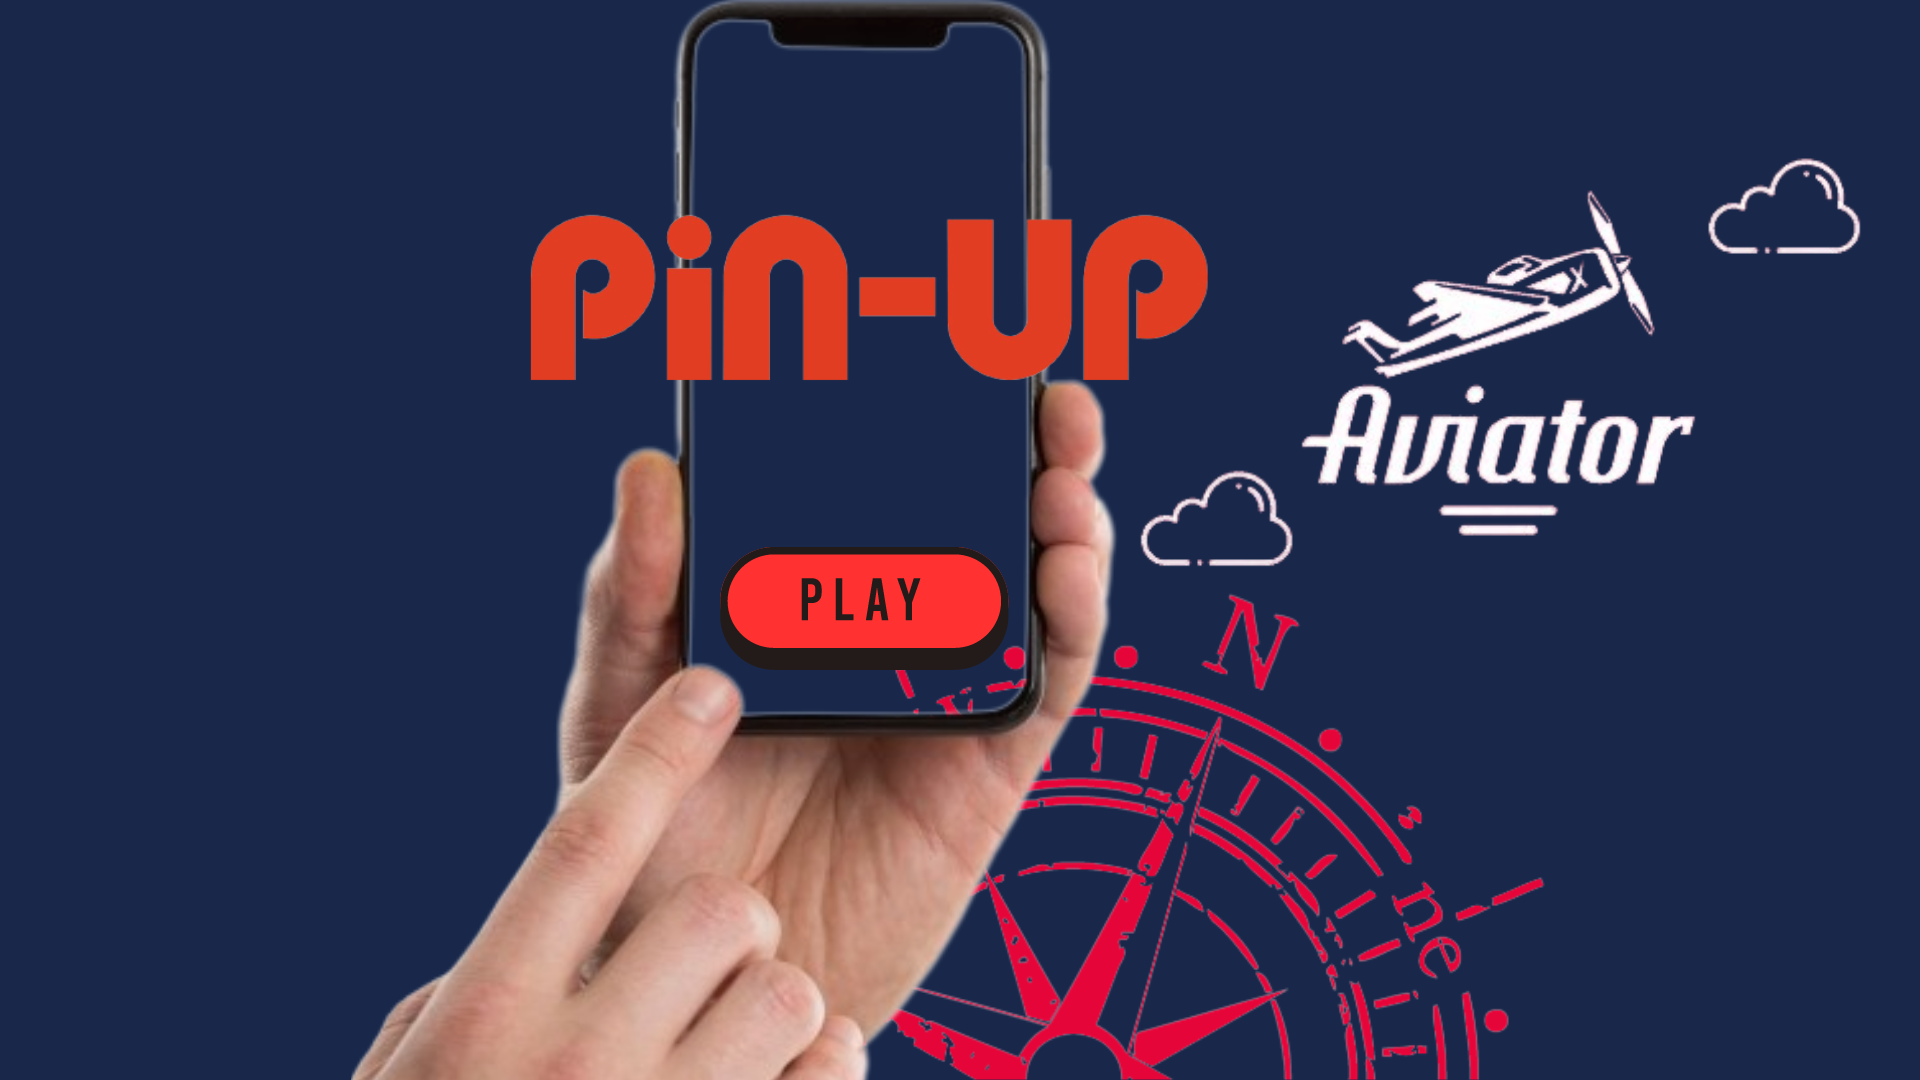 A person holding a smart phone in their hand and pin up aviator app logo

